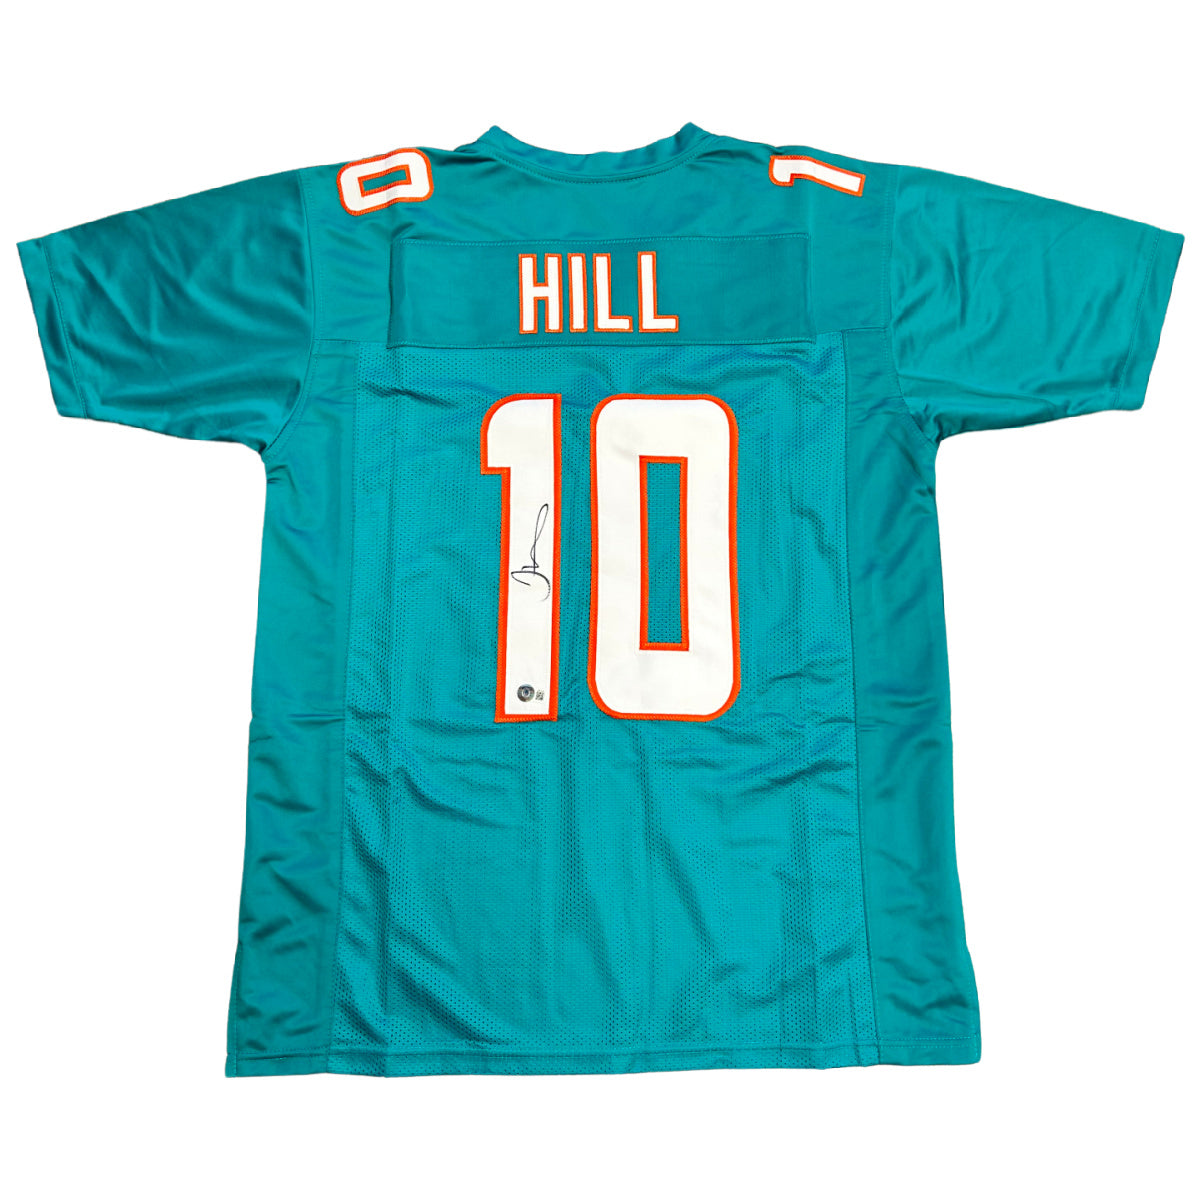 Tyreek Hill Autographed Miami Dolphins Teal Pro Style Jersey Beckett COA